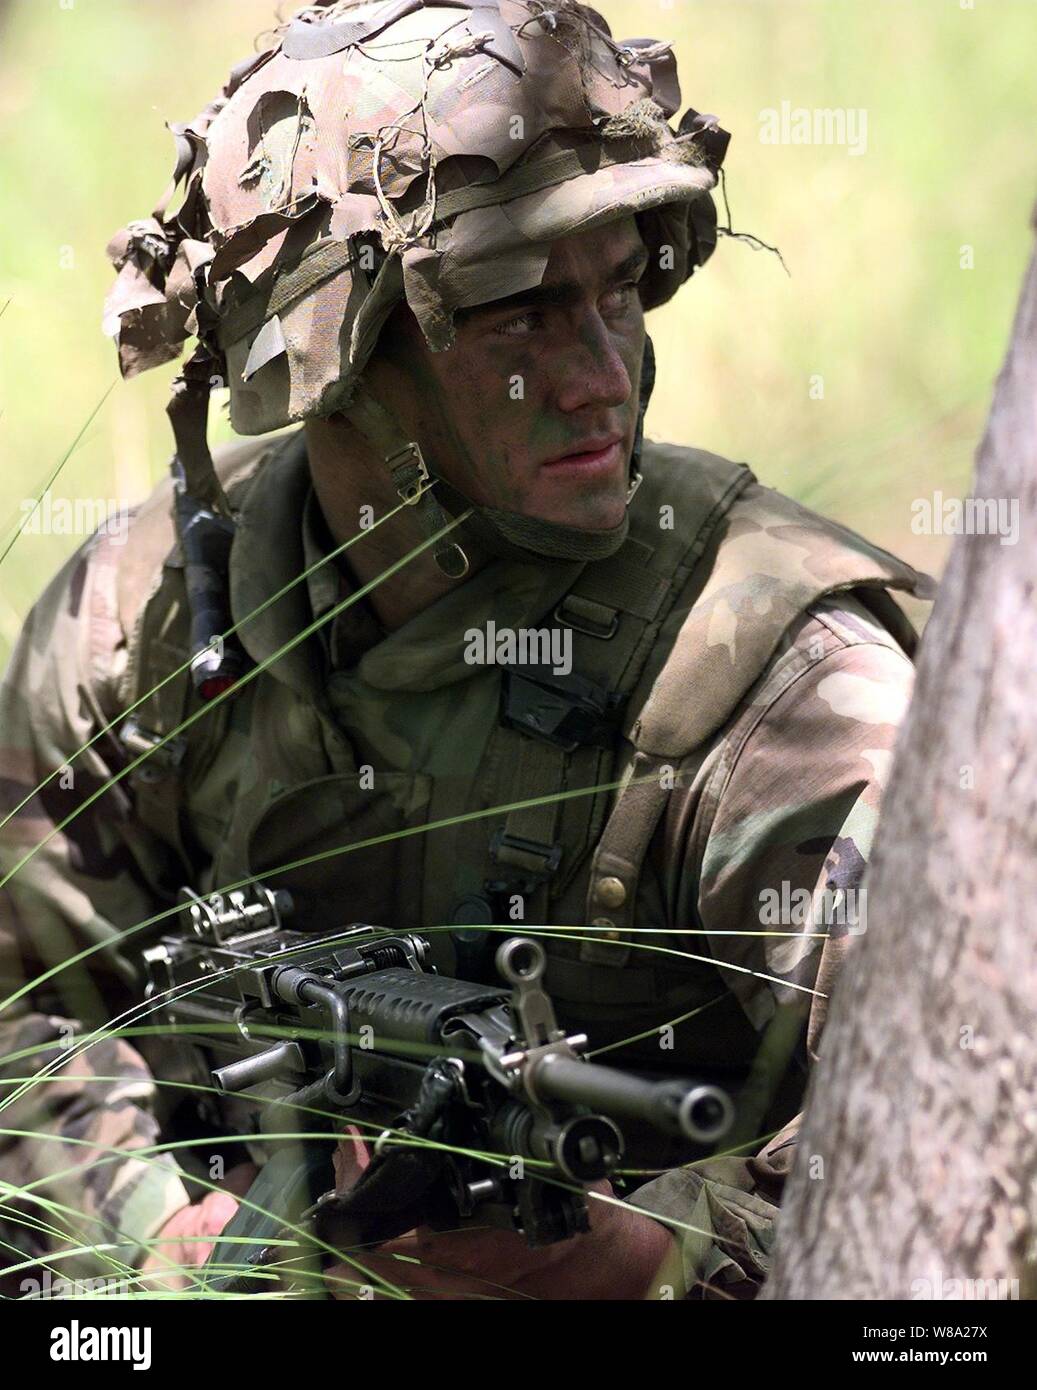 Pfc. Joe Gould, U.S. Marine Corps, looks for aggressor targets during a live fire exercise at the Shoalwater Bay Training Area in Queensland, Australia, on Oct. 3, 1999, as part of Exercise Crocodile '99.  Exercise Crocodile '99 is a combined U.S. and Australian military training exercise.  Gould is attached to Battalion Landing Team 15, Bravo Company. Stock Photo